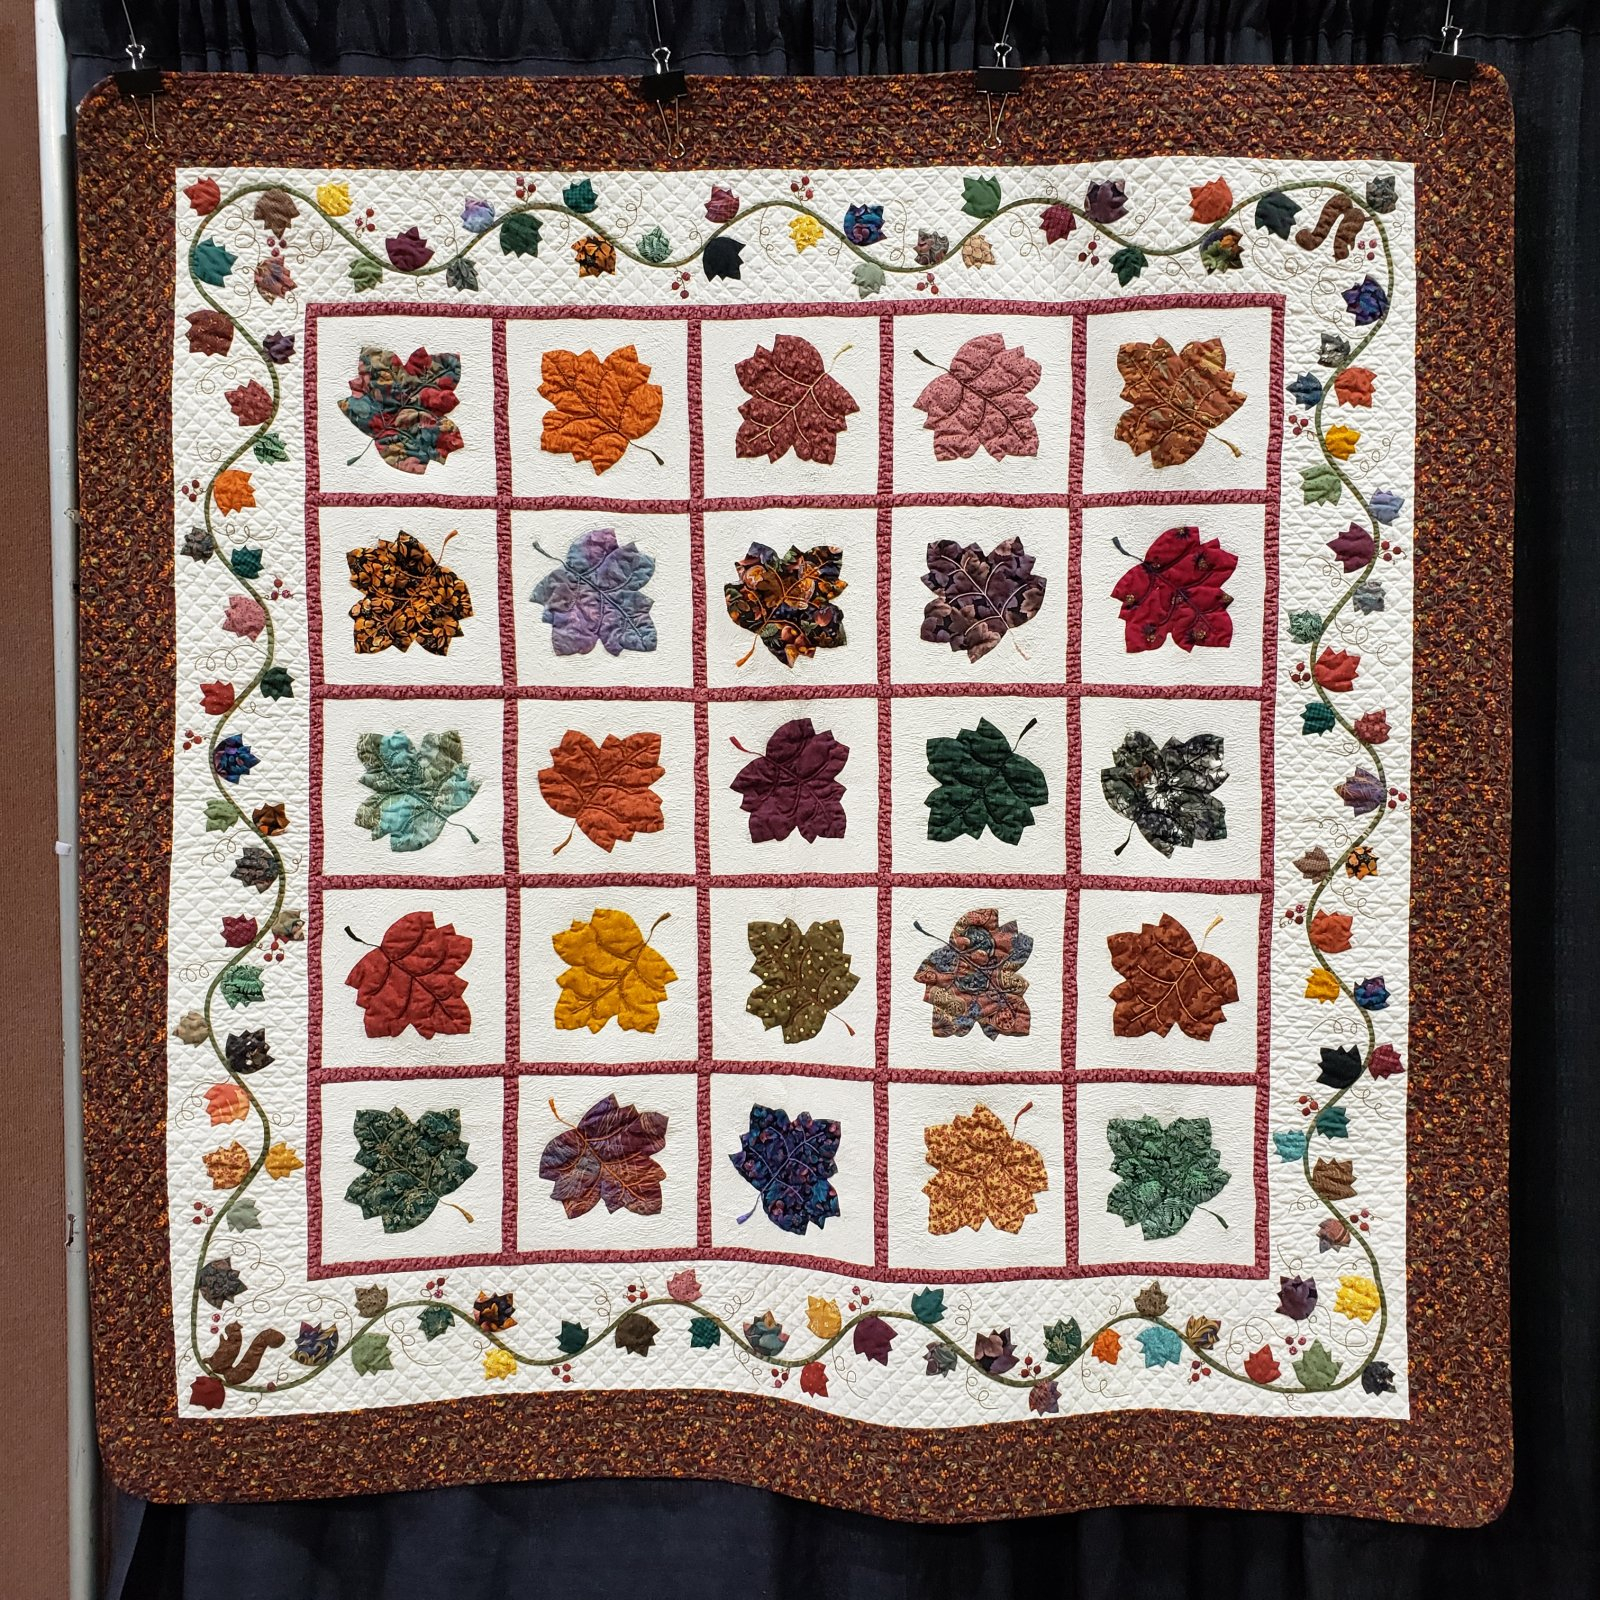 Hand Embroidery Patterns For Baby Quilts 2019 Quilt Show Quilts Group 1 Of 2 Public Pictures Only